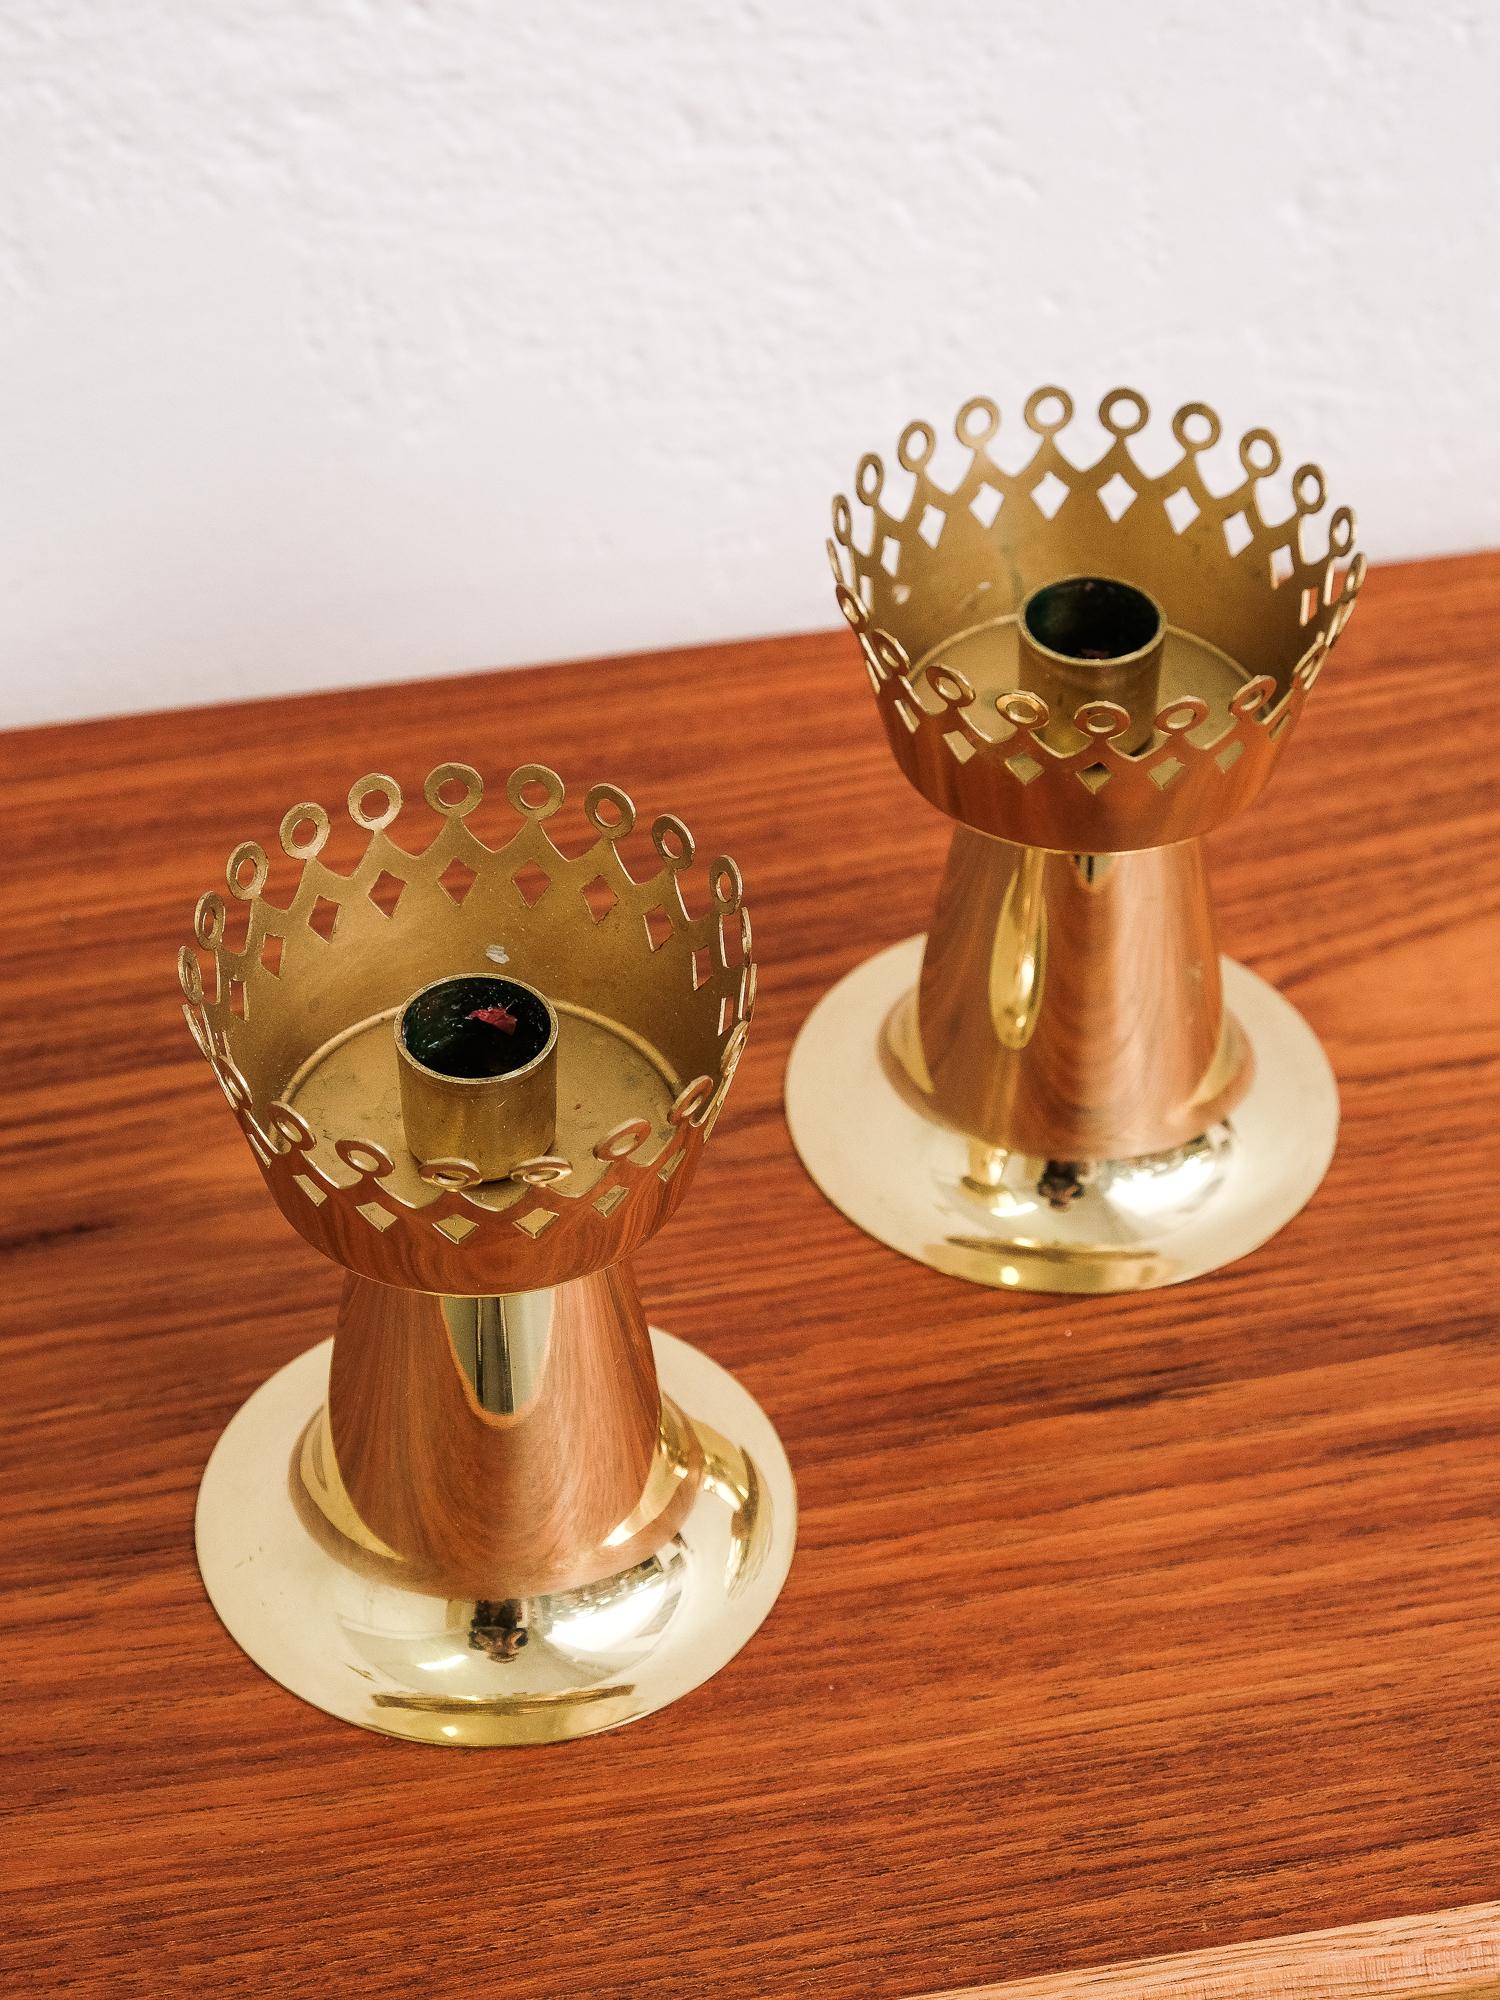 Model L159 brass candle holders by Hans-Agne Jakobsson, 1960s. Excellent original condition.